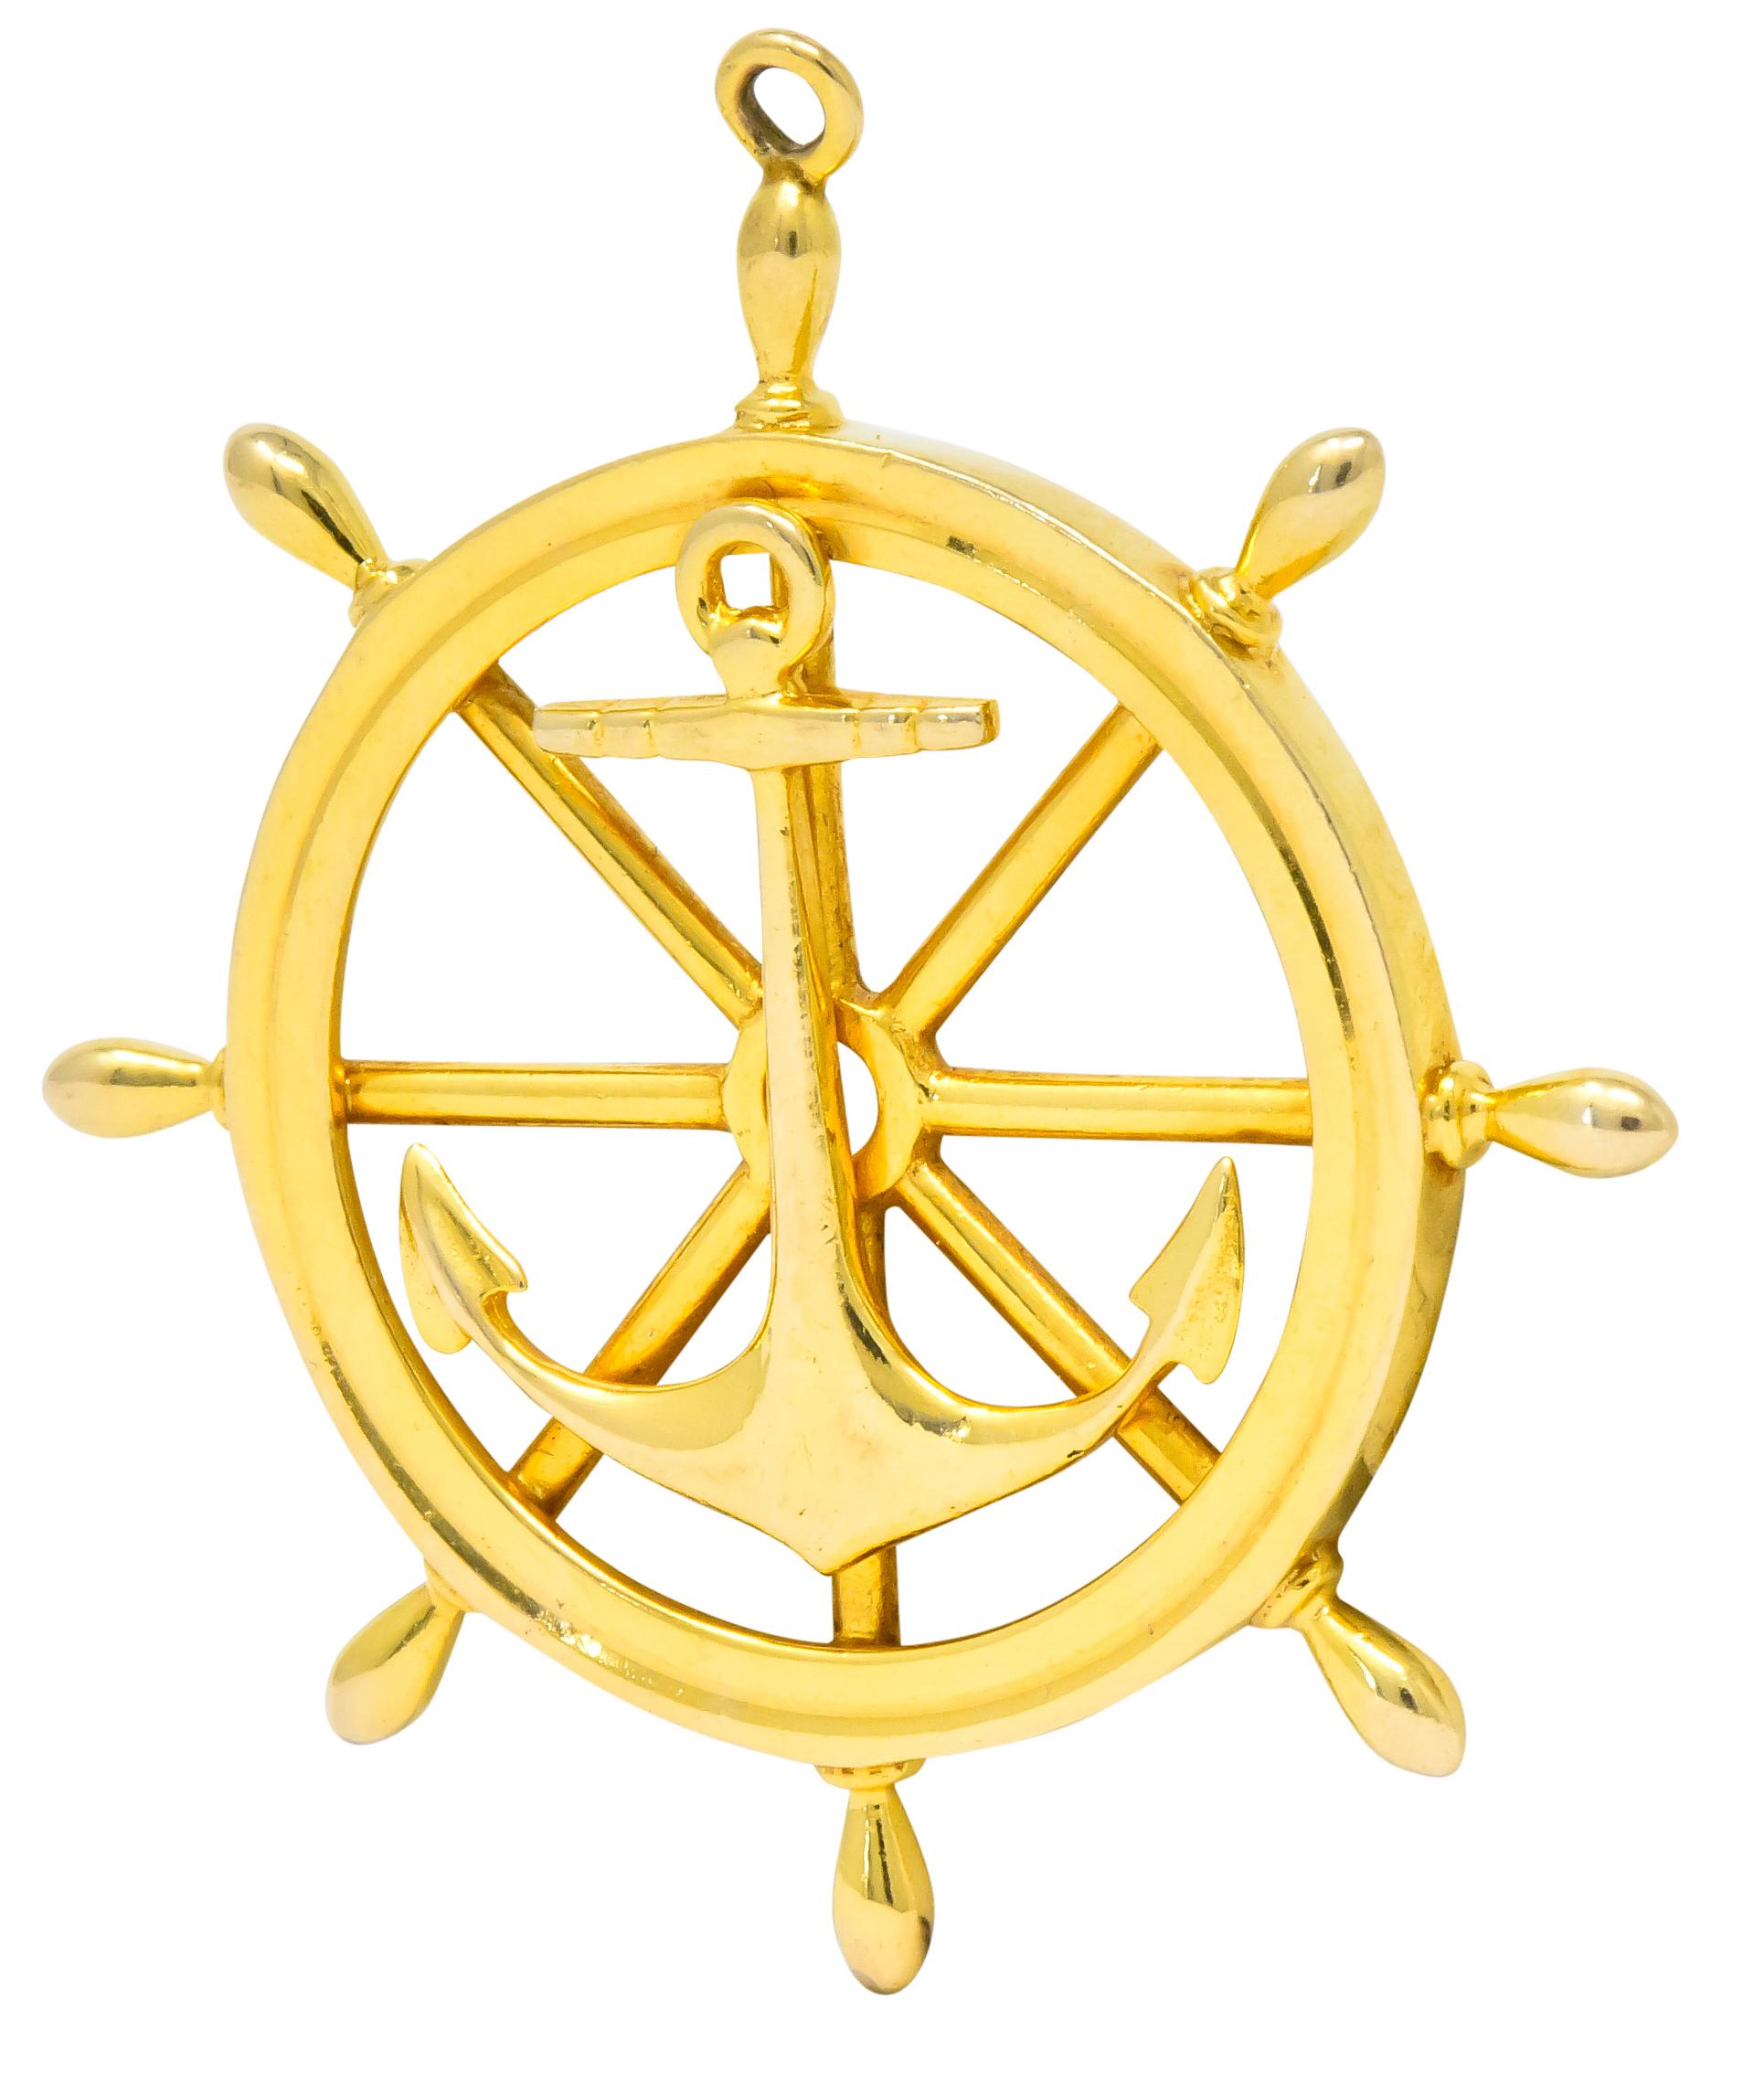 Pendant designed as a ship's wheel centering an anchor

Completed by jump ring at top of wheel

Tested as 14 karat gold

Measures: 1 3/4 x 5/8 inches

Circa 1950

Total weight: 9.1 grams

Memento. Adventure. Sailing.
 

 

Stock Number: We- 3118